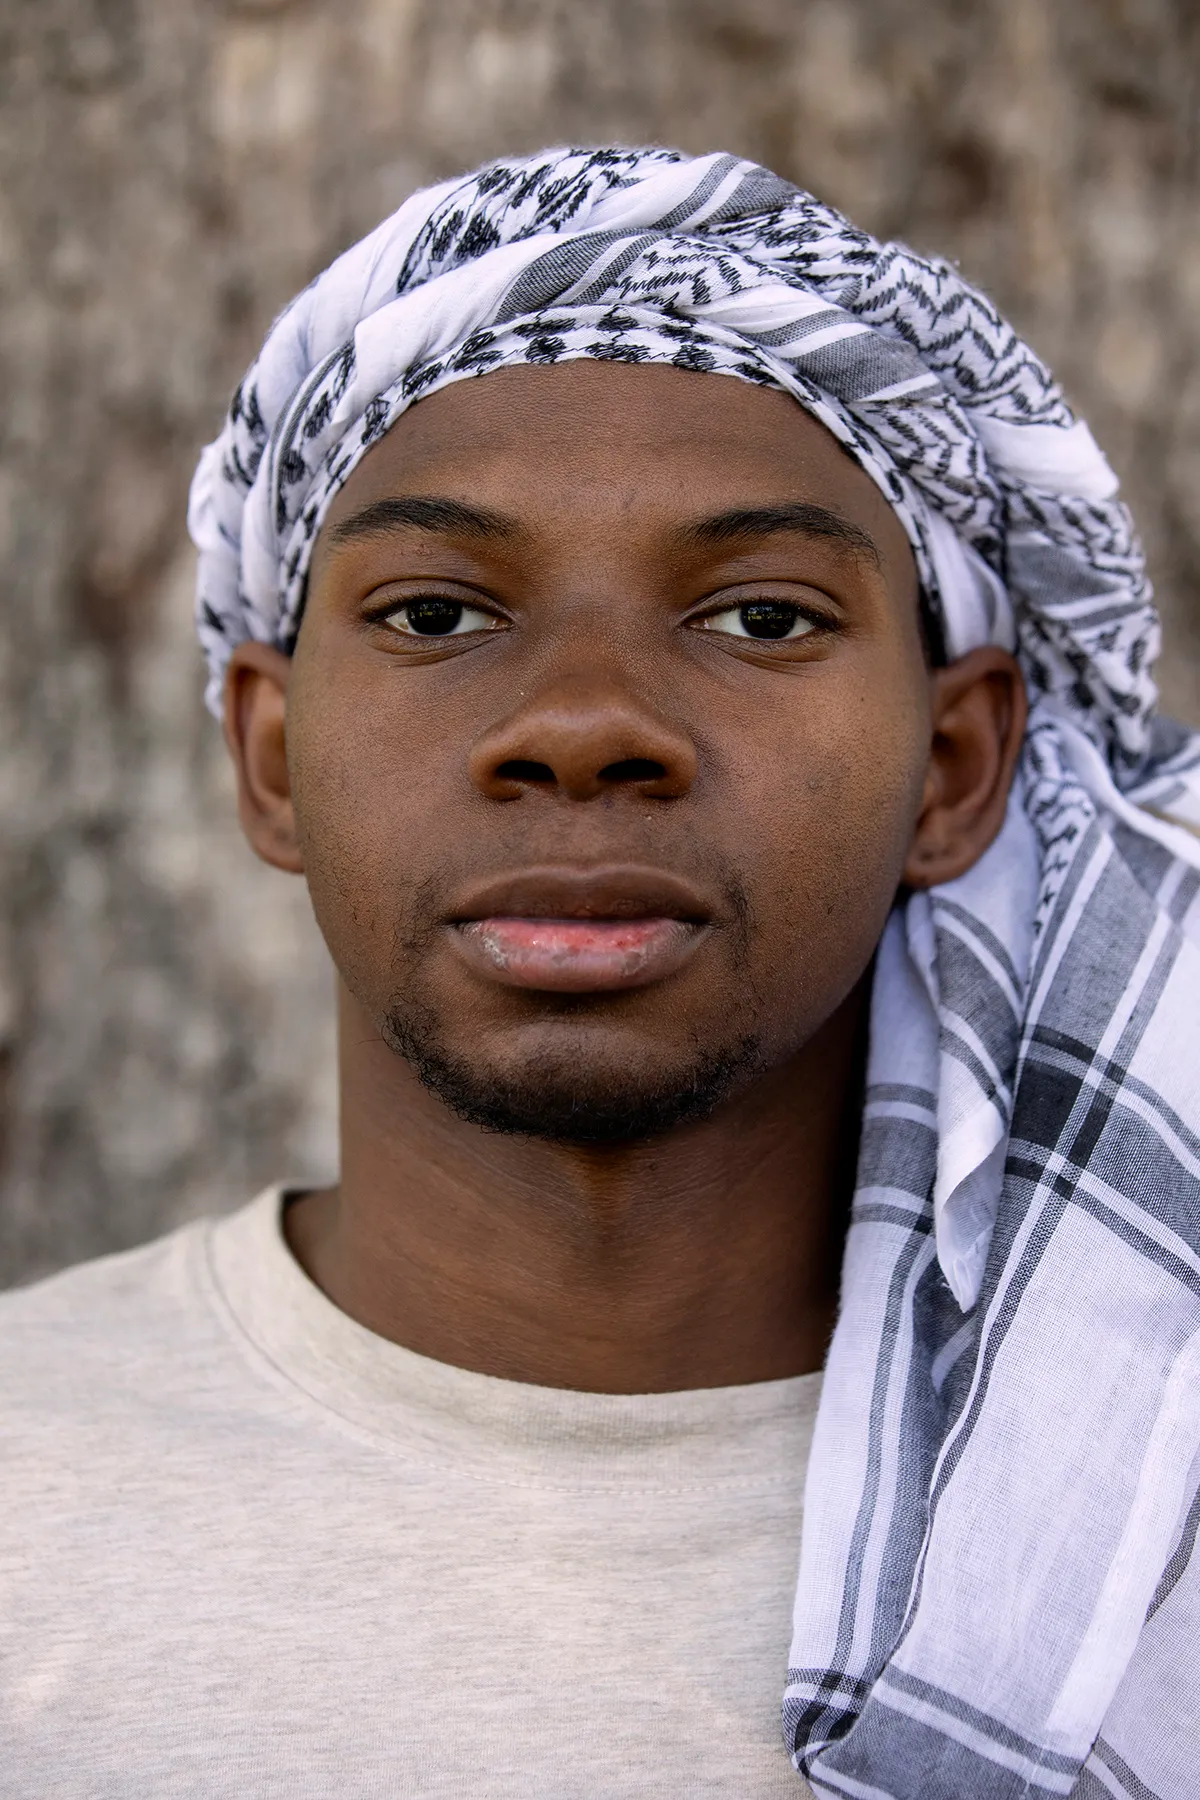 David Hunt poses for a portrait. He is looking at the camera and wearing a keffiyeh around his head.